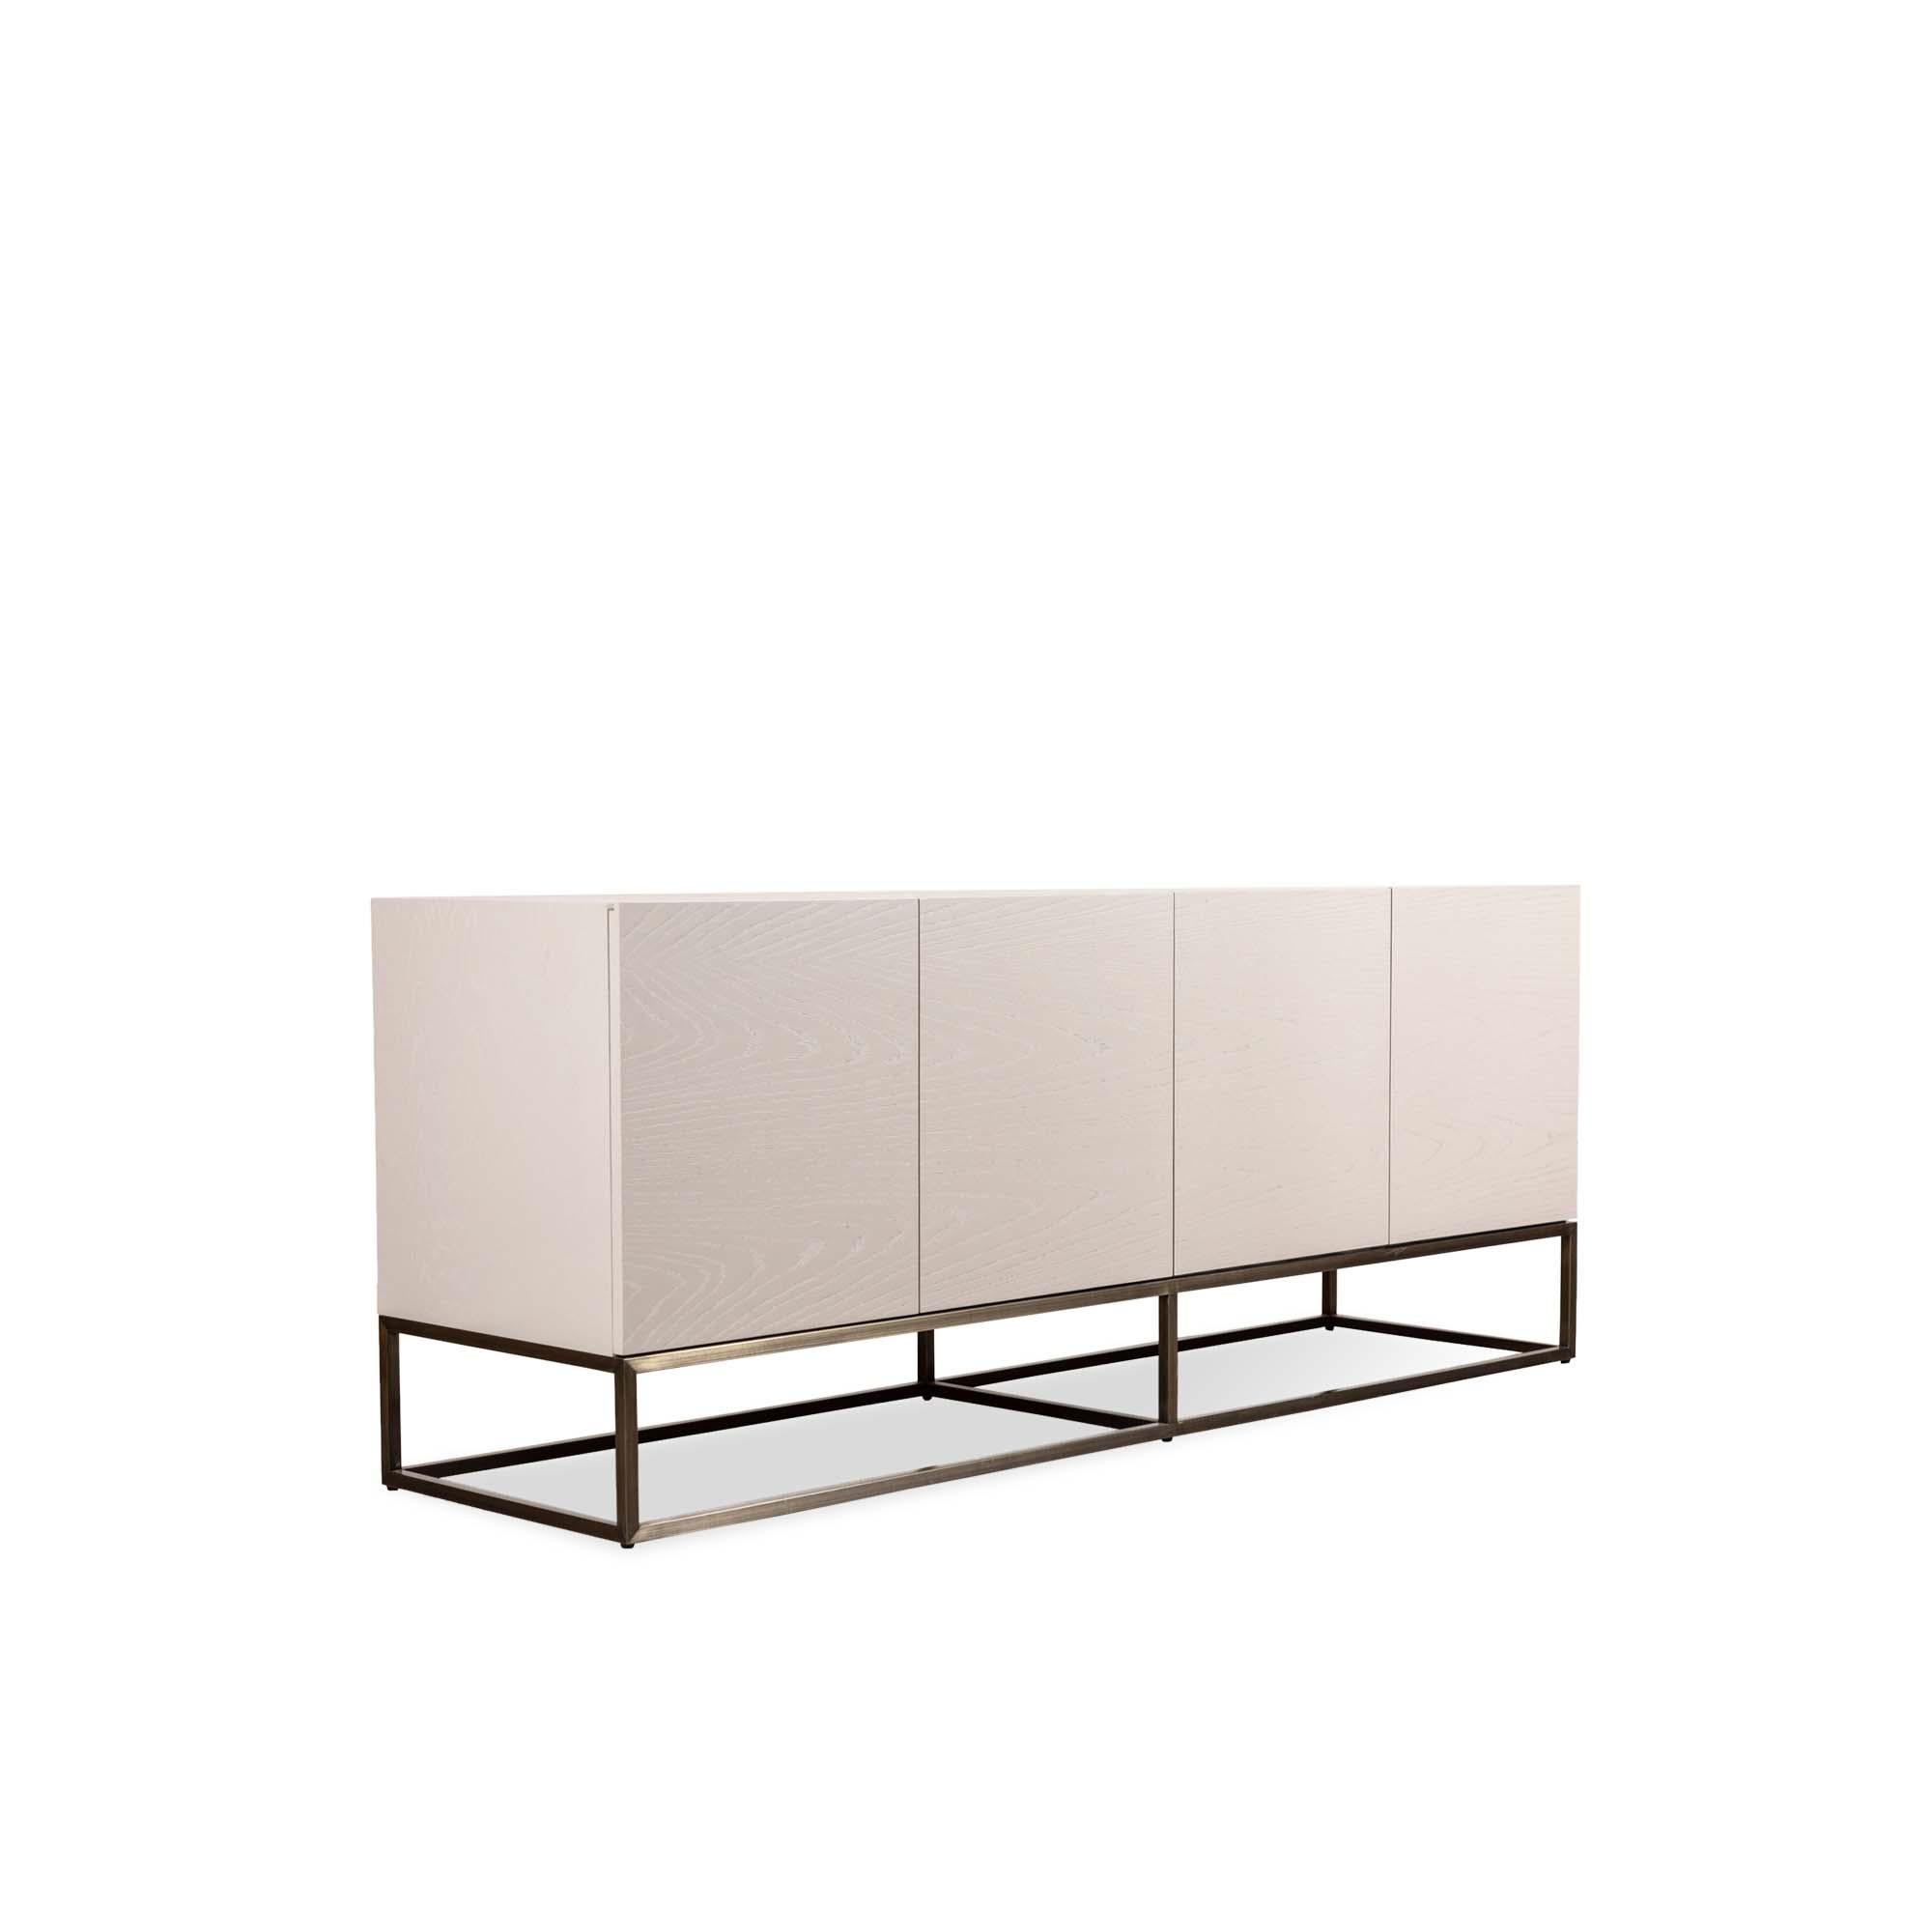 The thin frame cabinet is a four-door case piece with a thin, plated steel base. The interior includes one drawer and adjustable shelves. 

 The Lawson-Fenning Collection is designed and handmade in Los Angeles, California. Reach out to discover